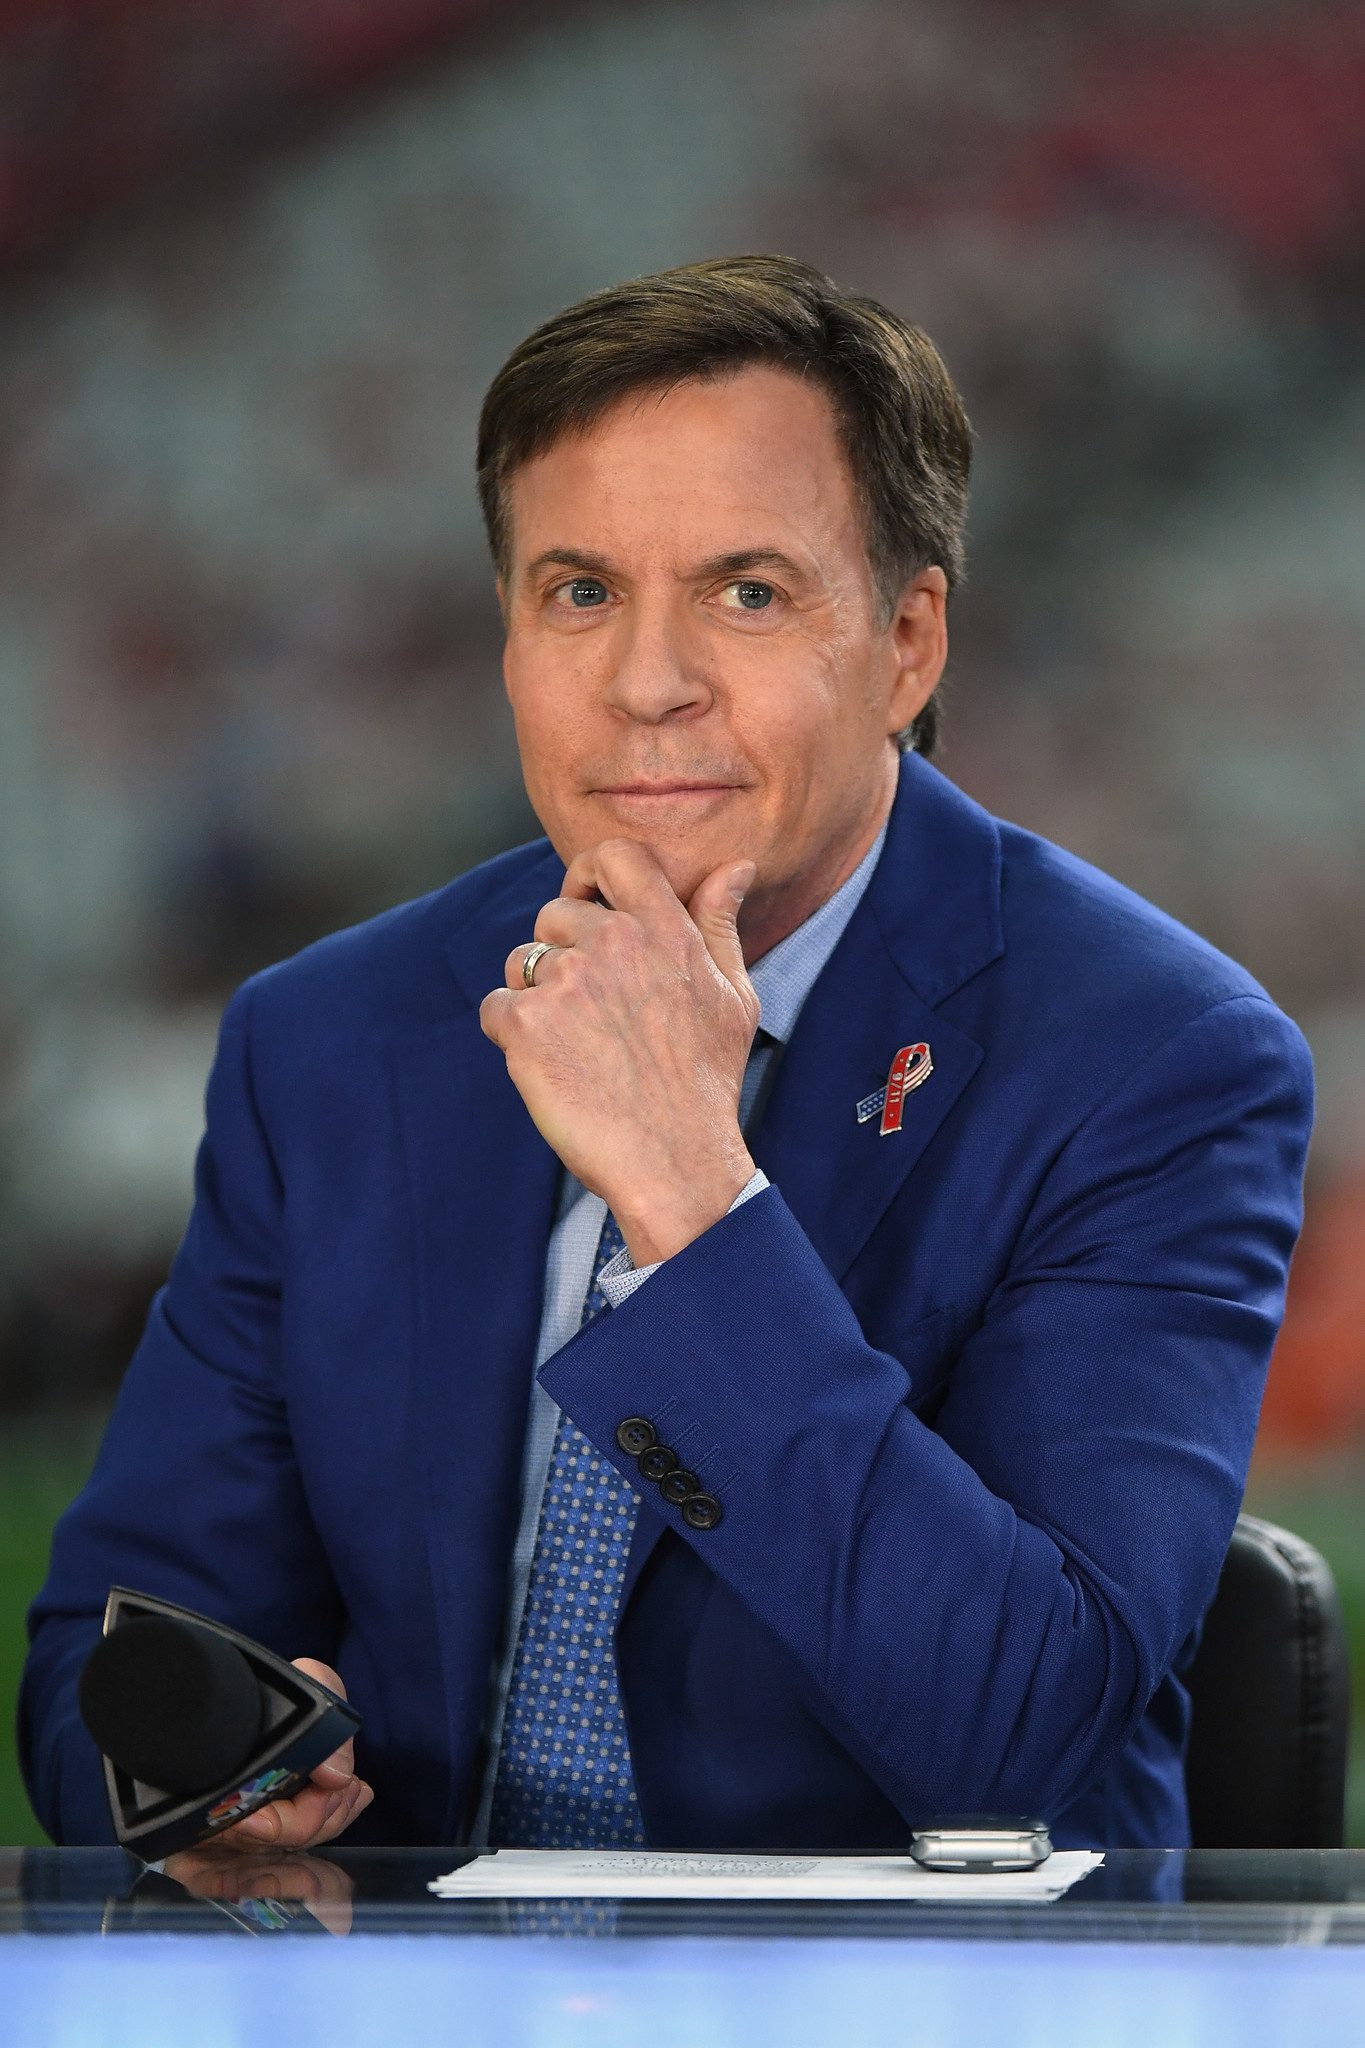 Bob Costas on Cubs: There's reason to be anxious - Chicago Tribune